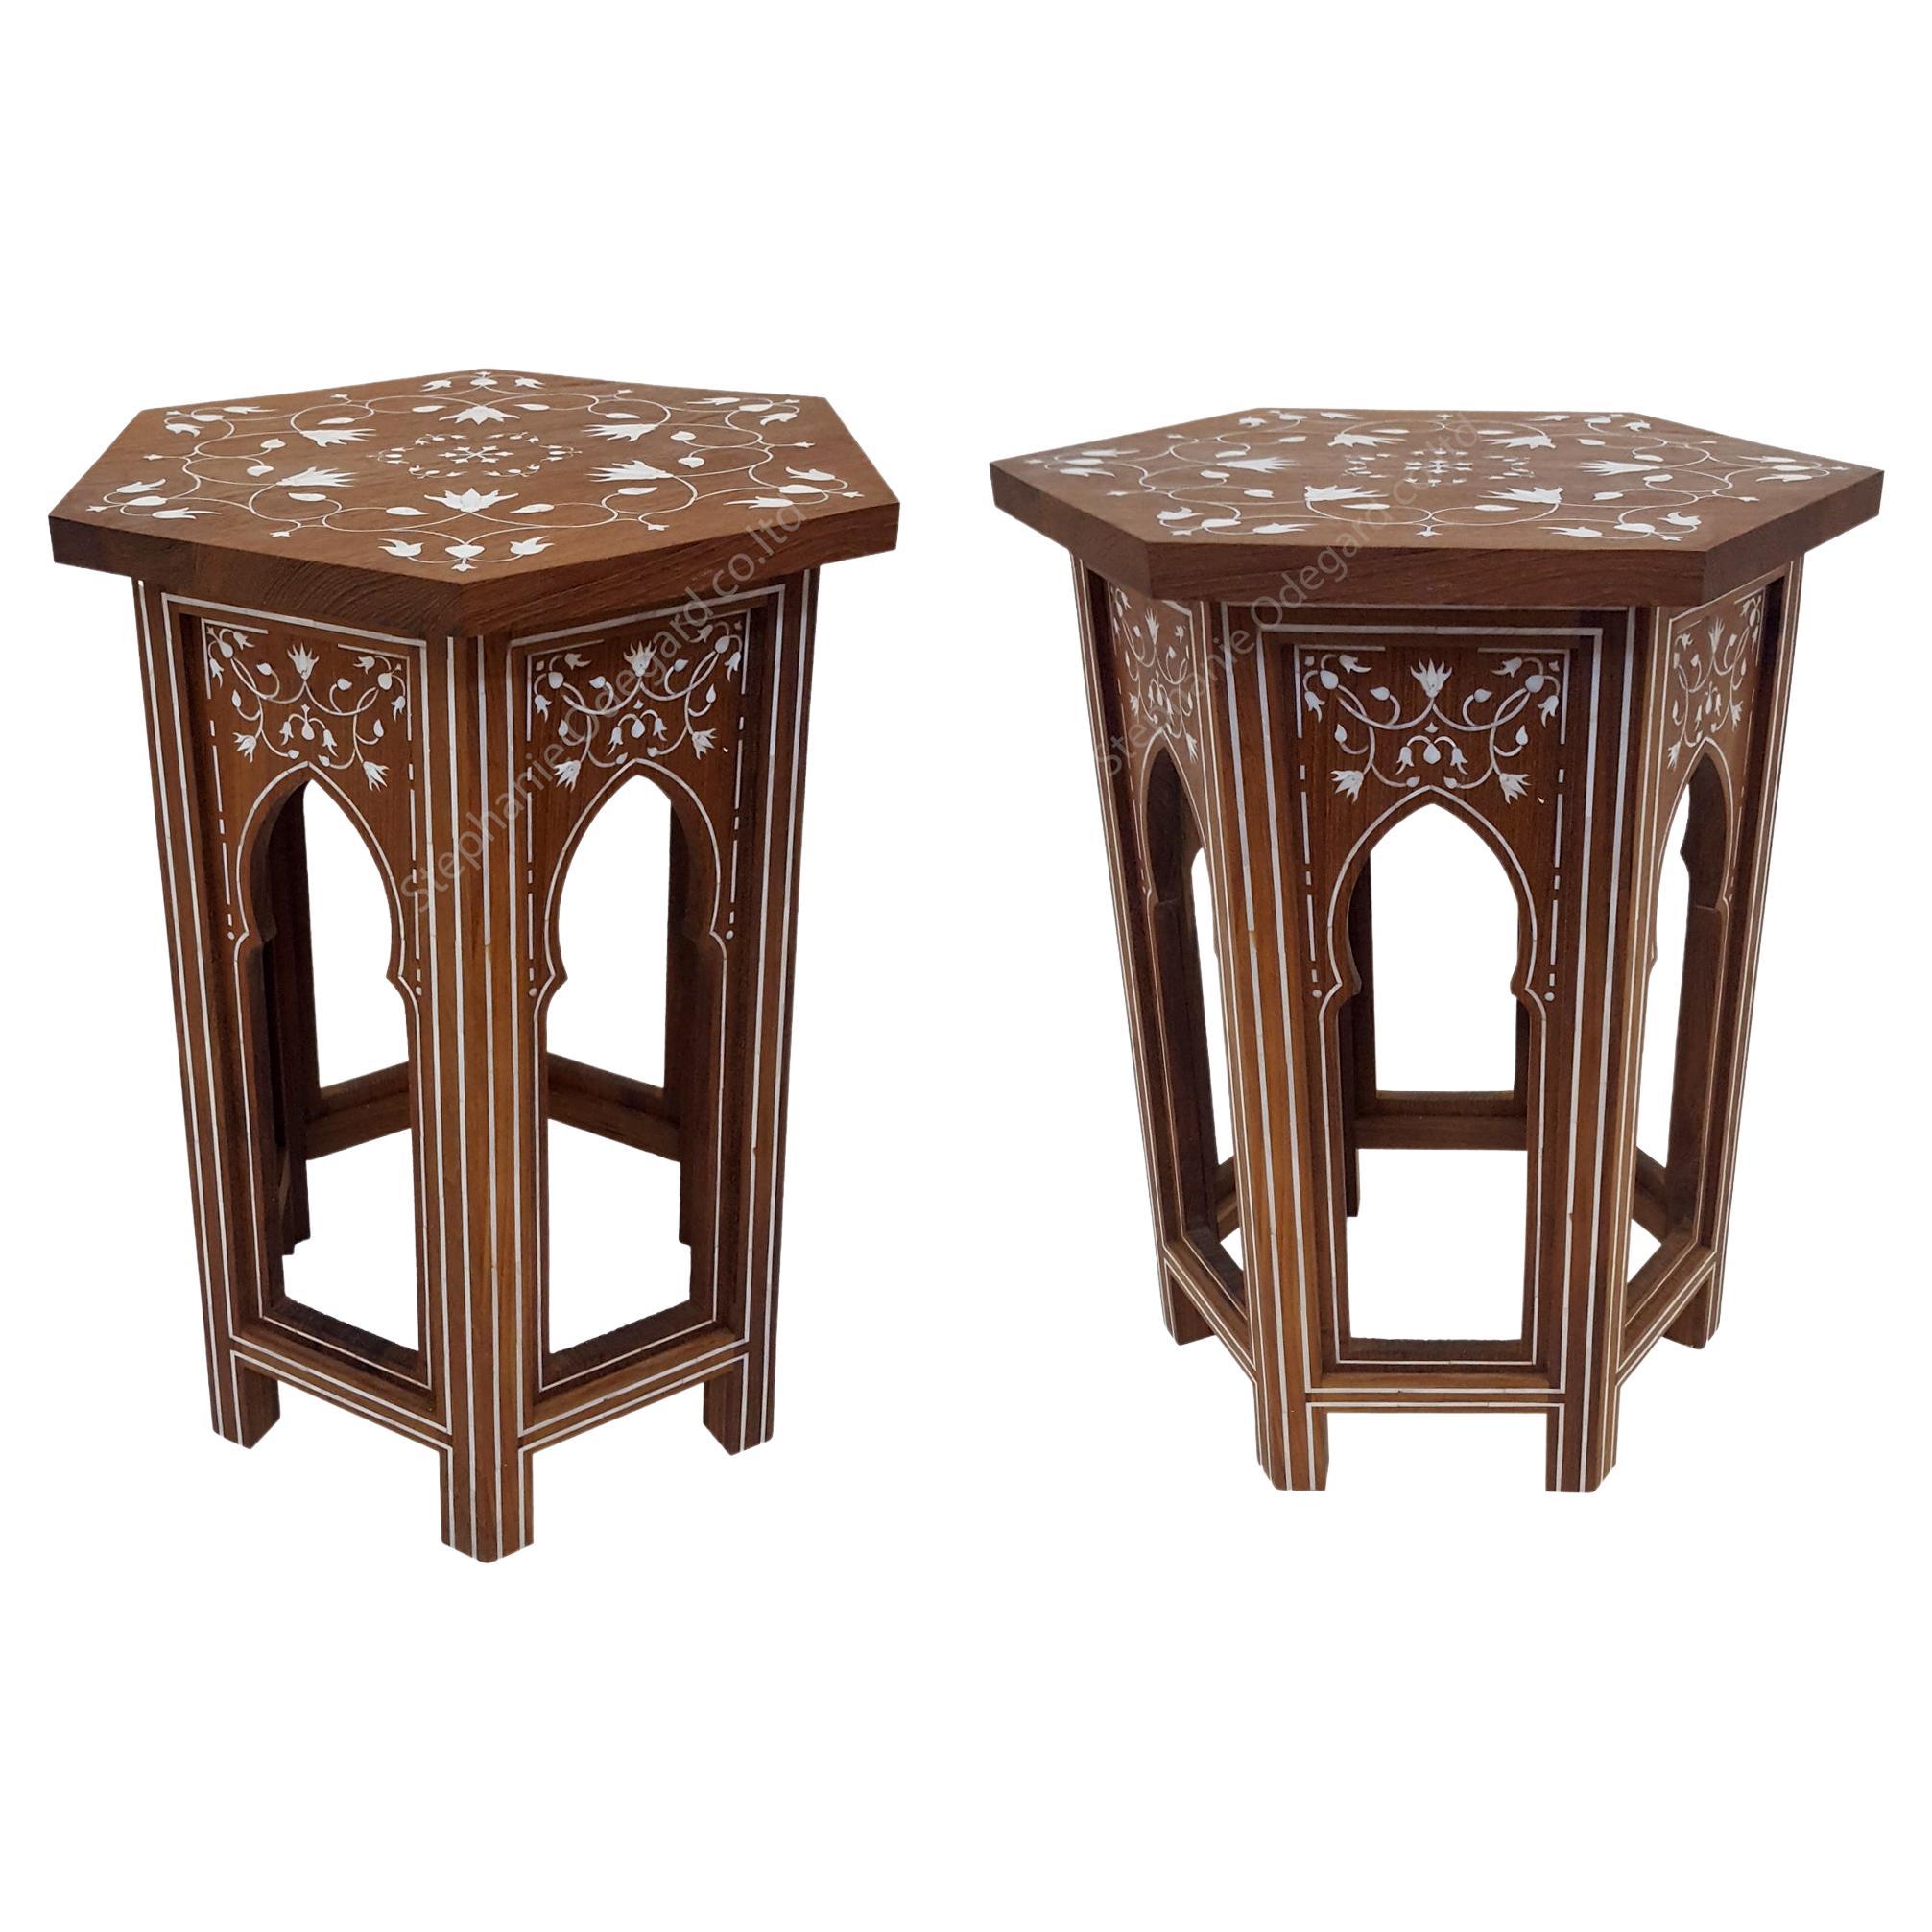 Pair of Side Tables, Round Bed Side Tables with Mother of Pearl Inlay in Wood For Sale